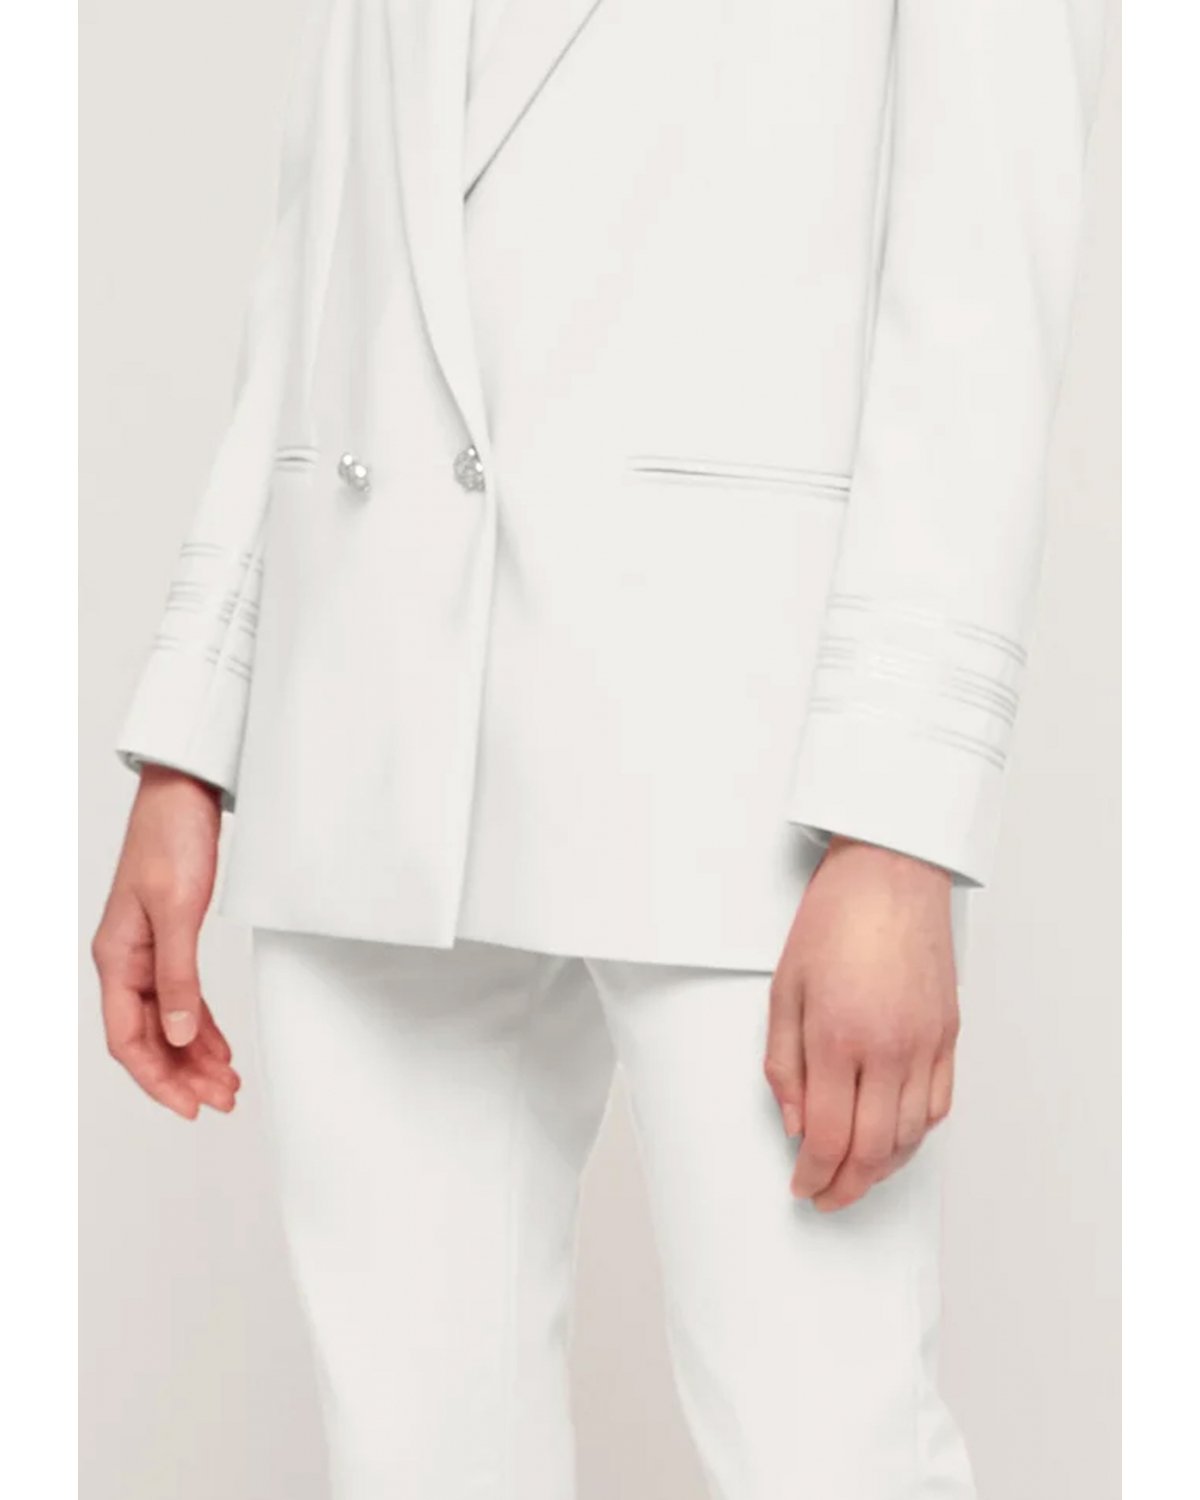 Long white blazer | Spring Summer 2023 Collection, 73_74, Cruise 2023 Collection, Warm weather wear, Ready to Wear, Spring days, Spring suits, Mid season sale -40%, Summer Sale | Genny